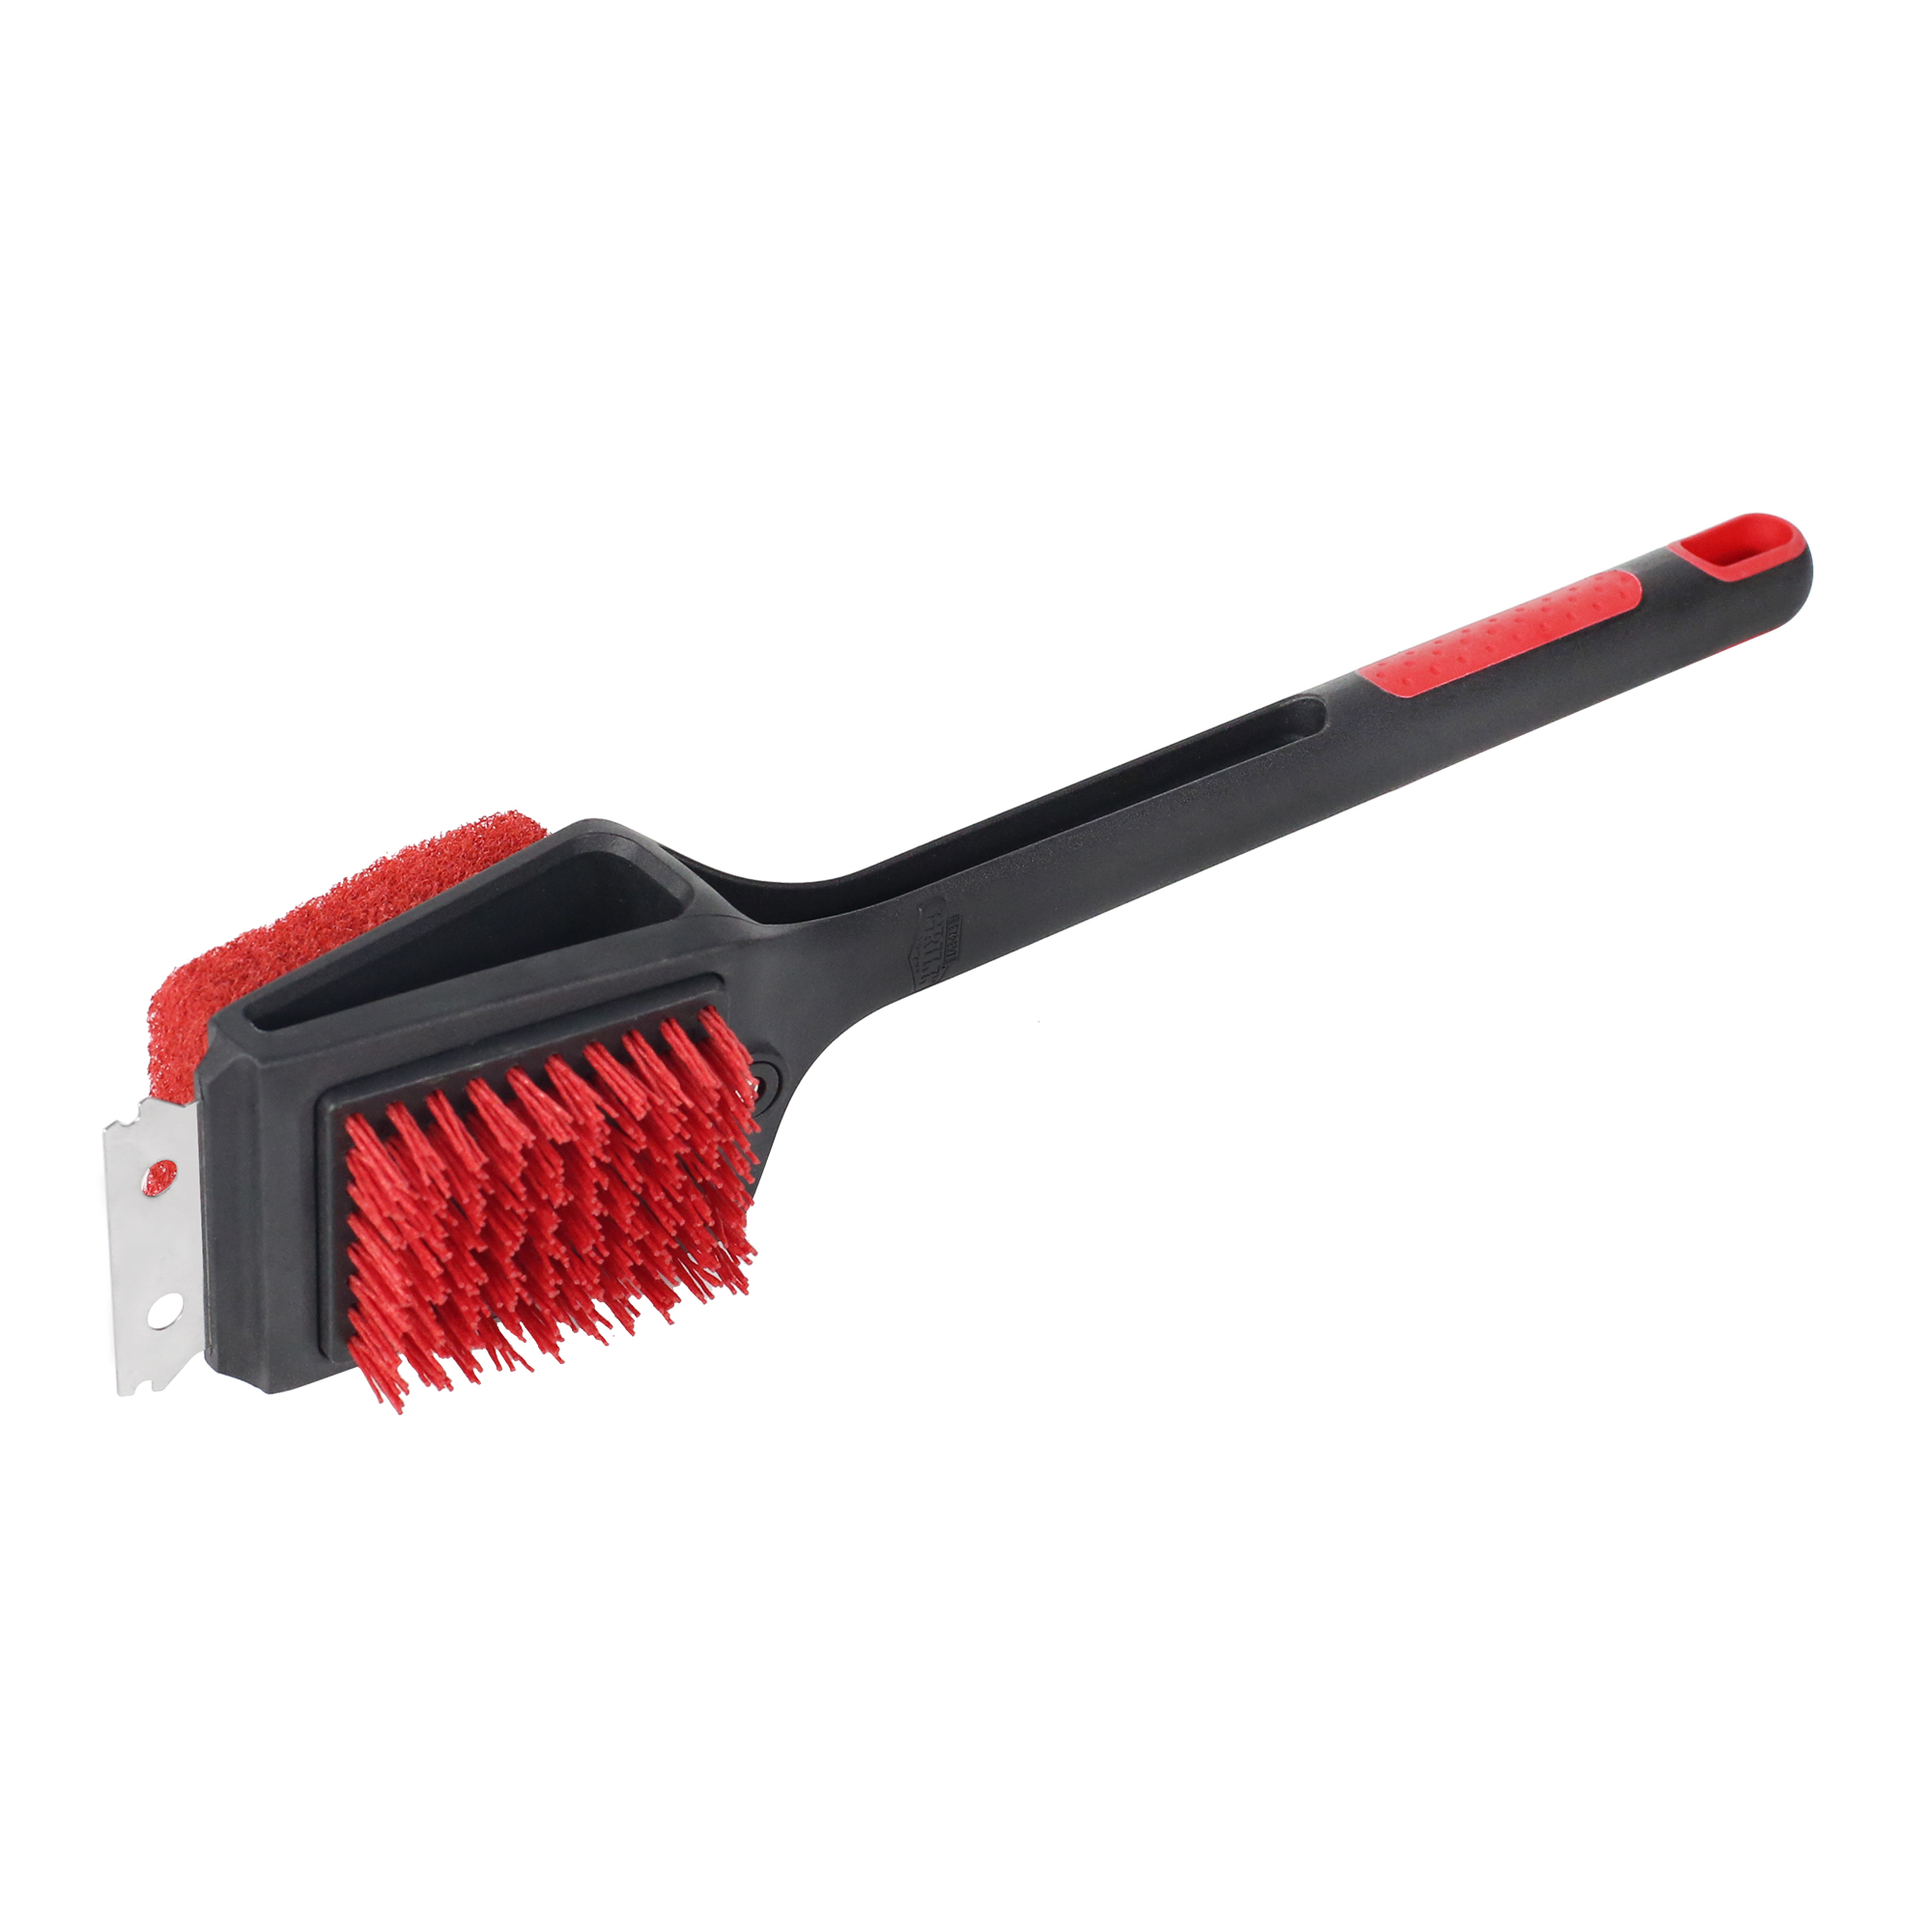 Expert Grill 3 in 1 Cleaning Cold Grill Brush with Stainless Steel Scraper - image 4 of 10